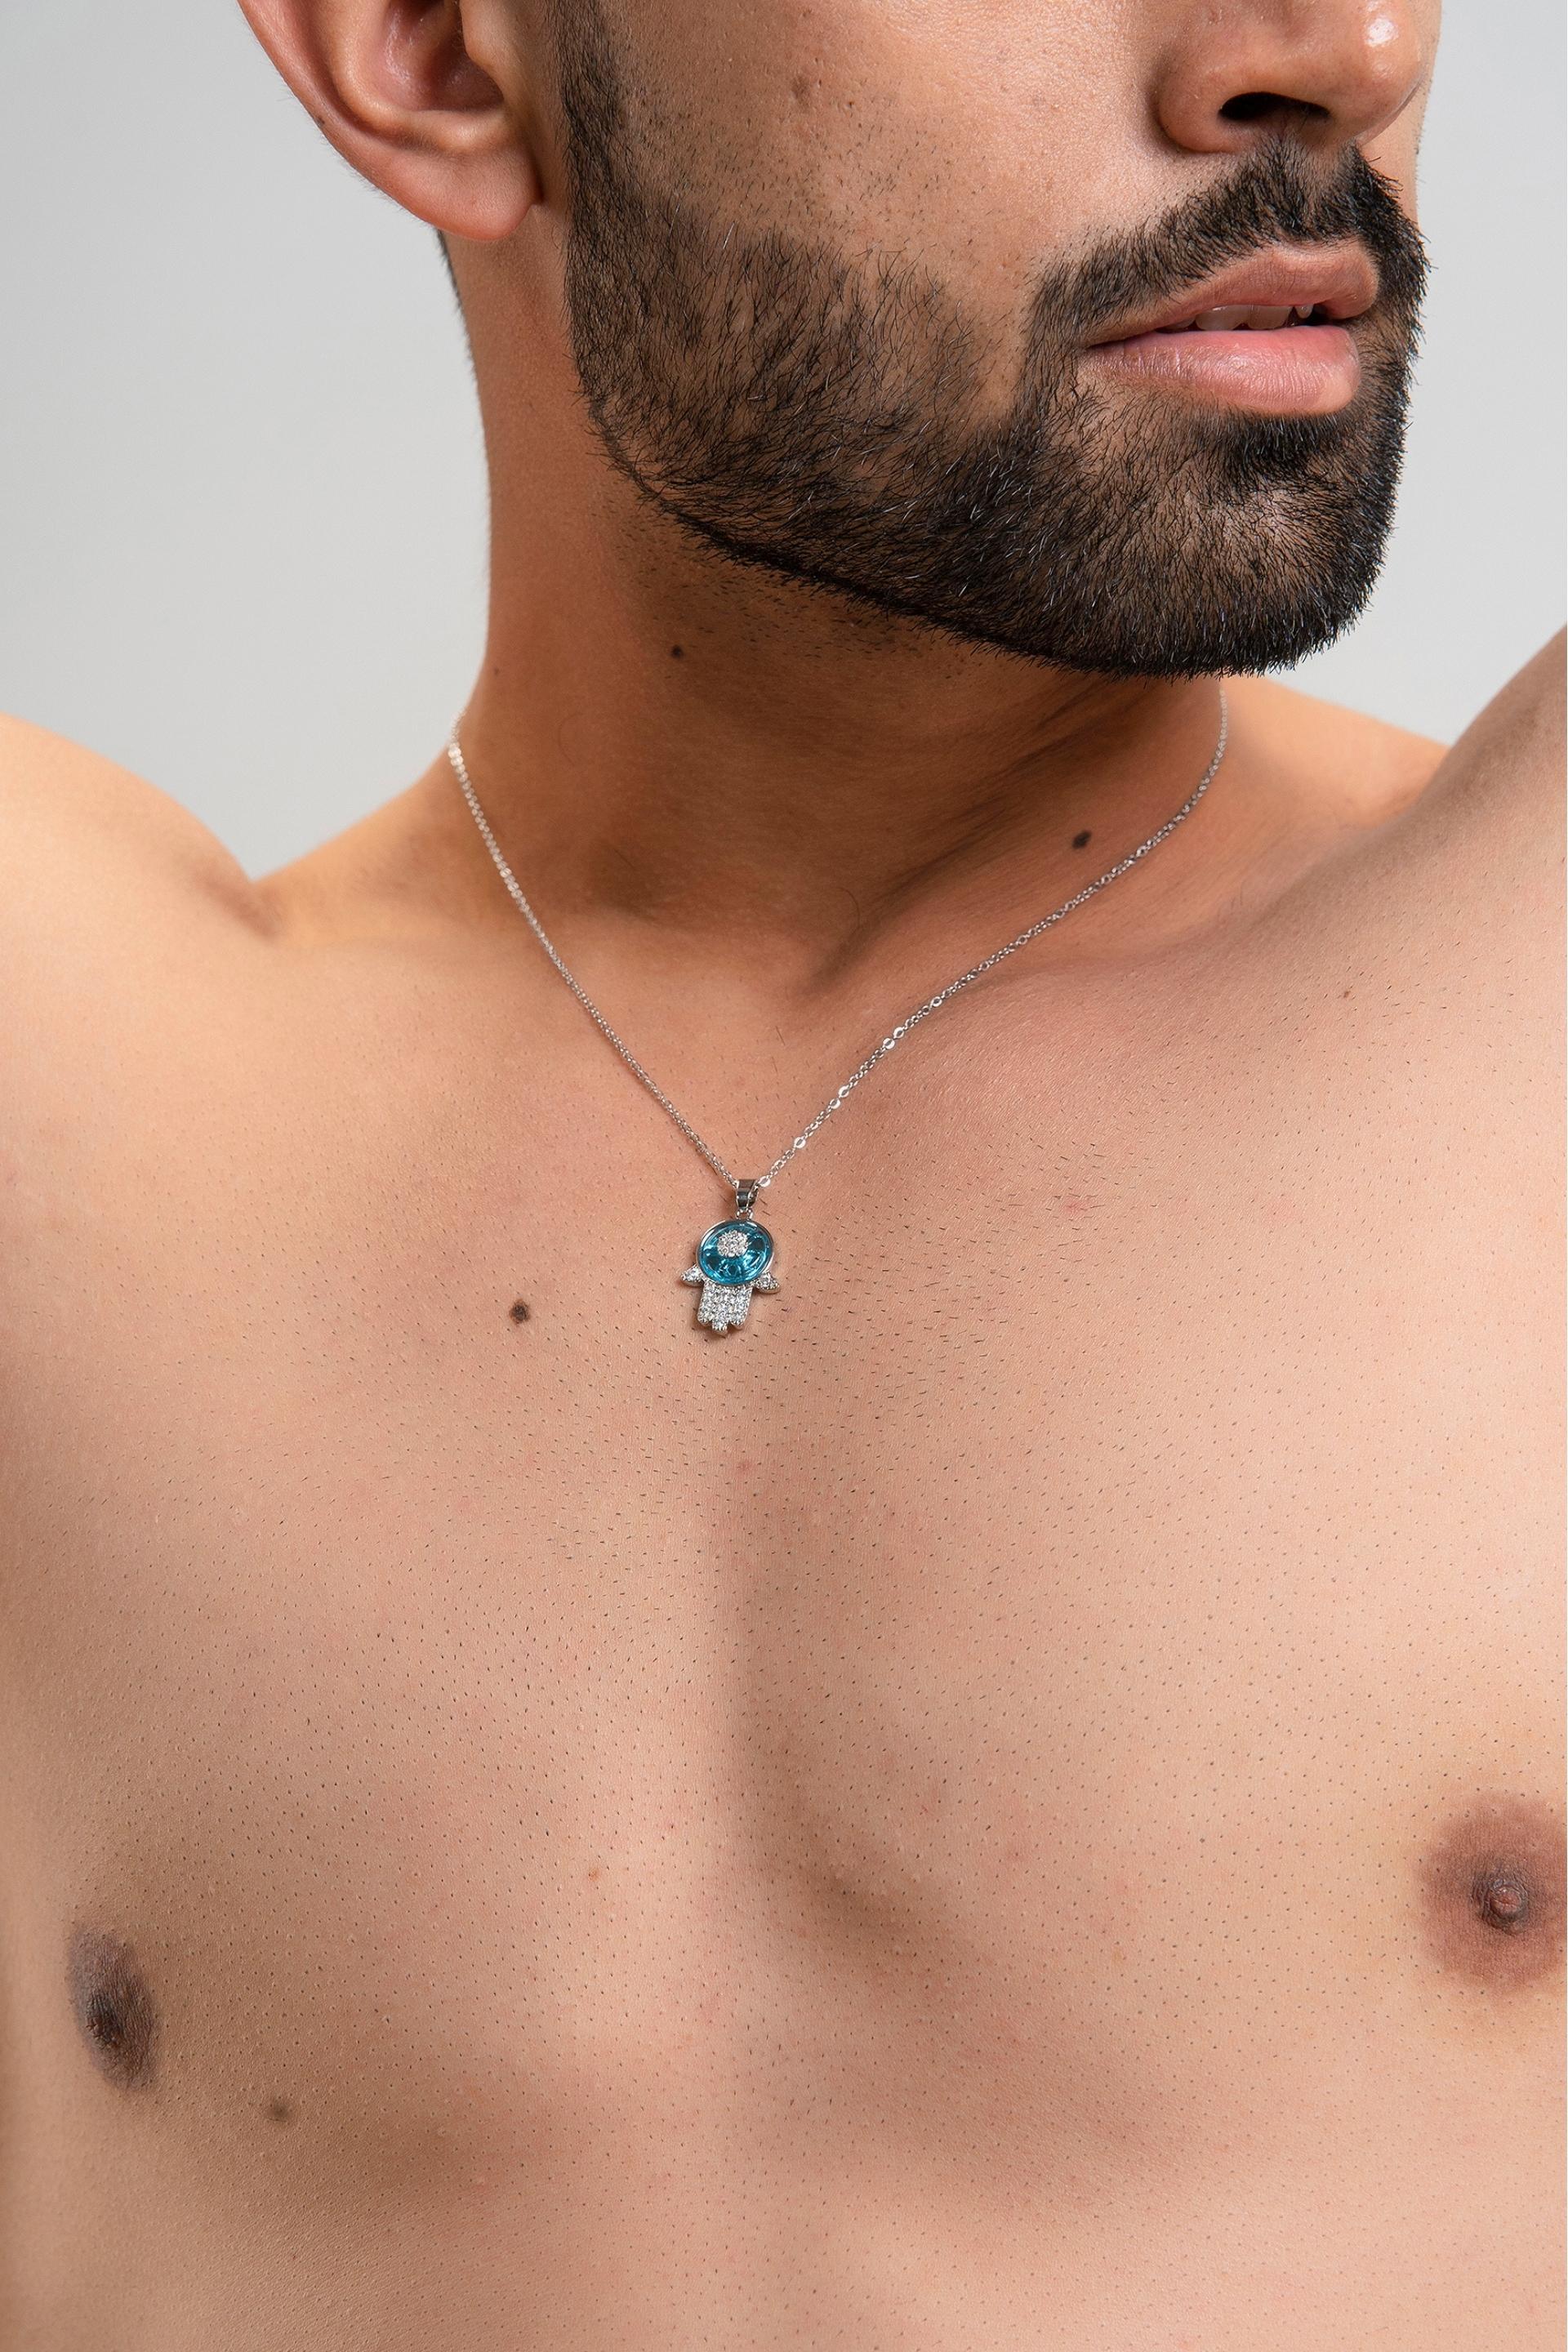 Firangi Yarn Silver Neck Chain with Blue Pendant Jewelery For Men